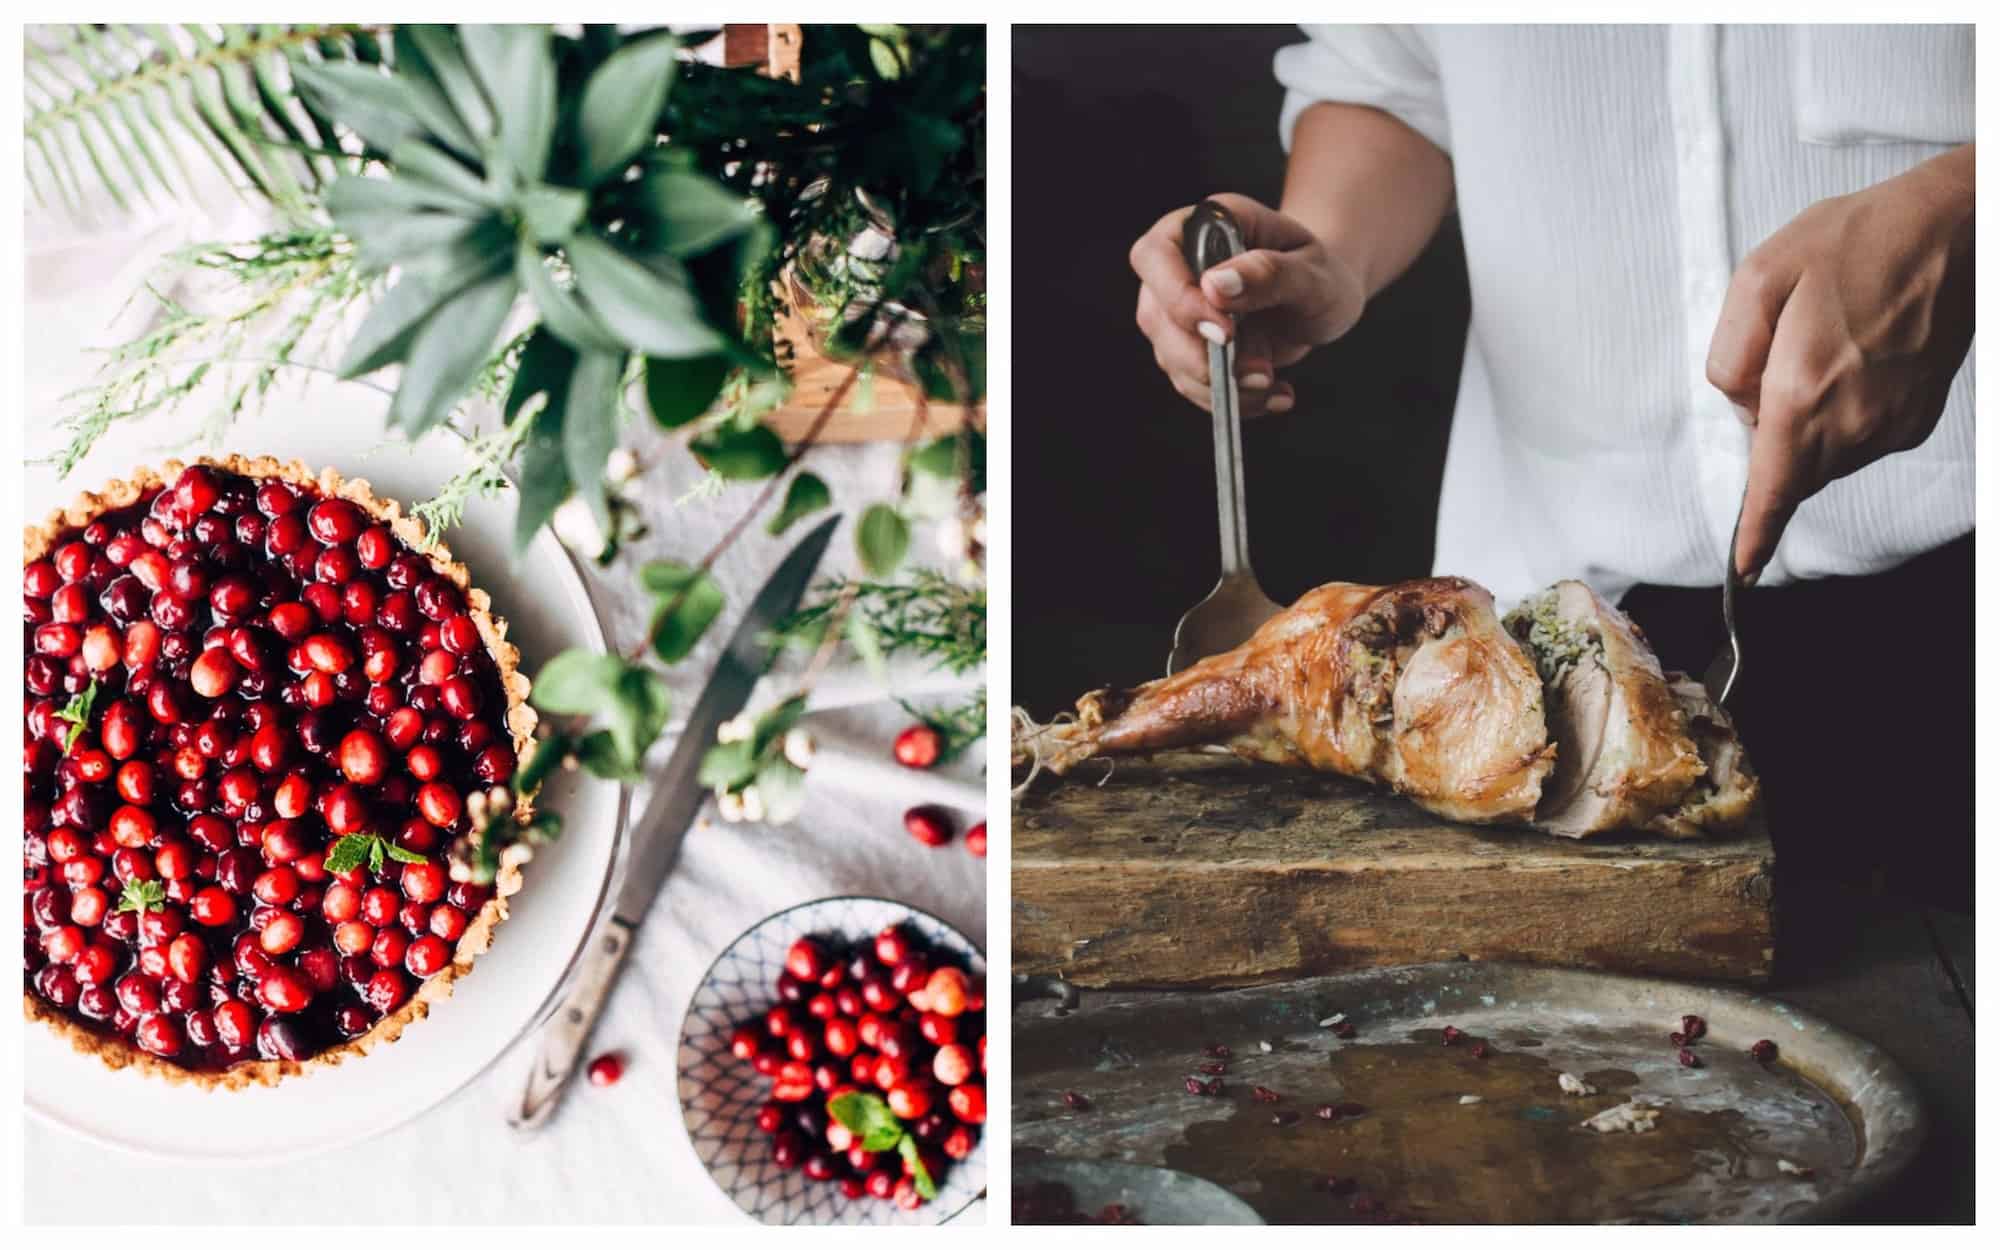 Left: A circular cranberry pie served in a white dish; Right: A person scoops a chopped roasted turkey with two silver serving utensils.